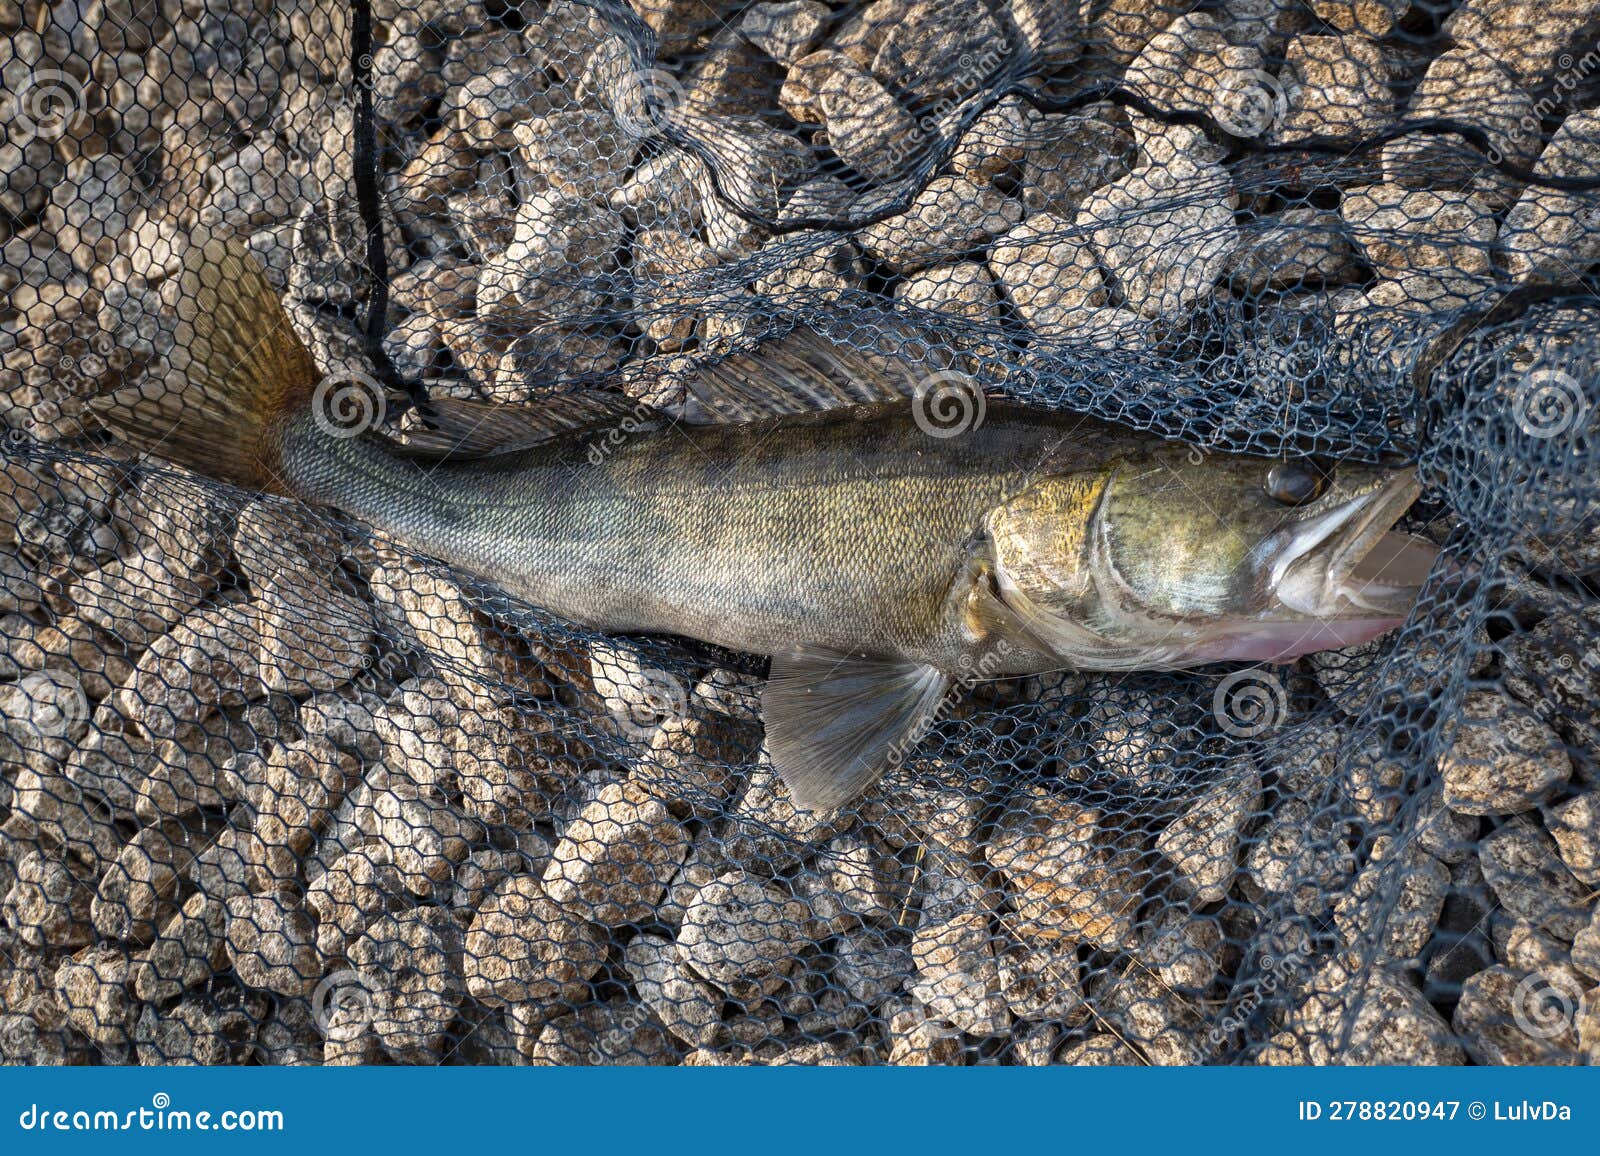 A big river fish stock image. Image of fish, catch, sale - 278820947